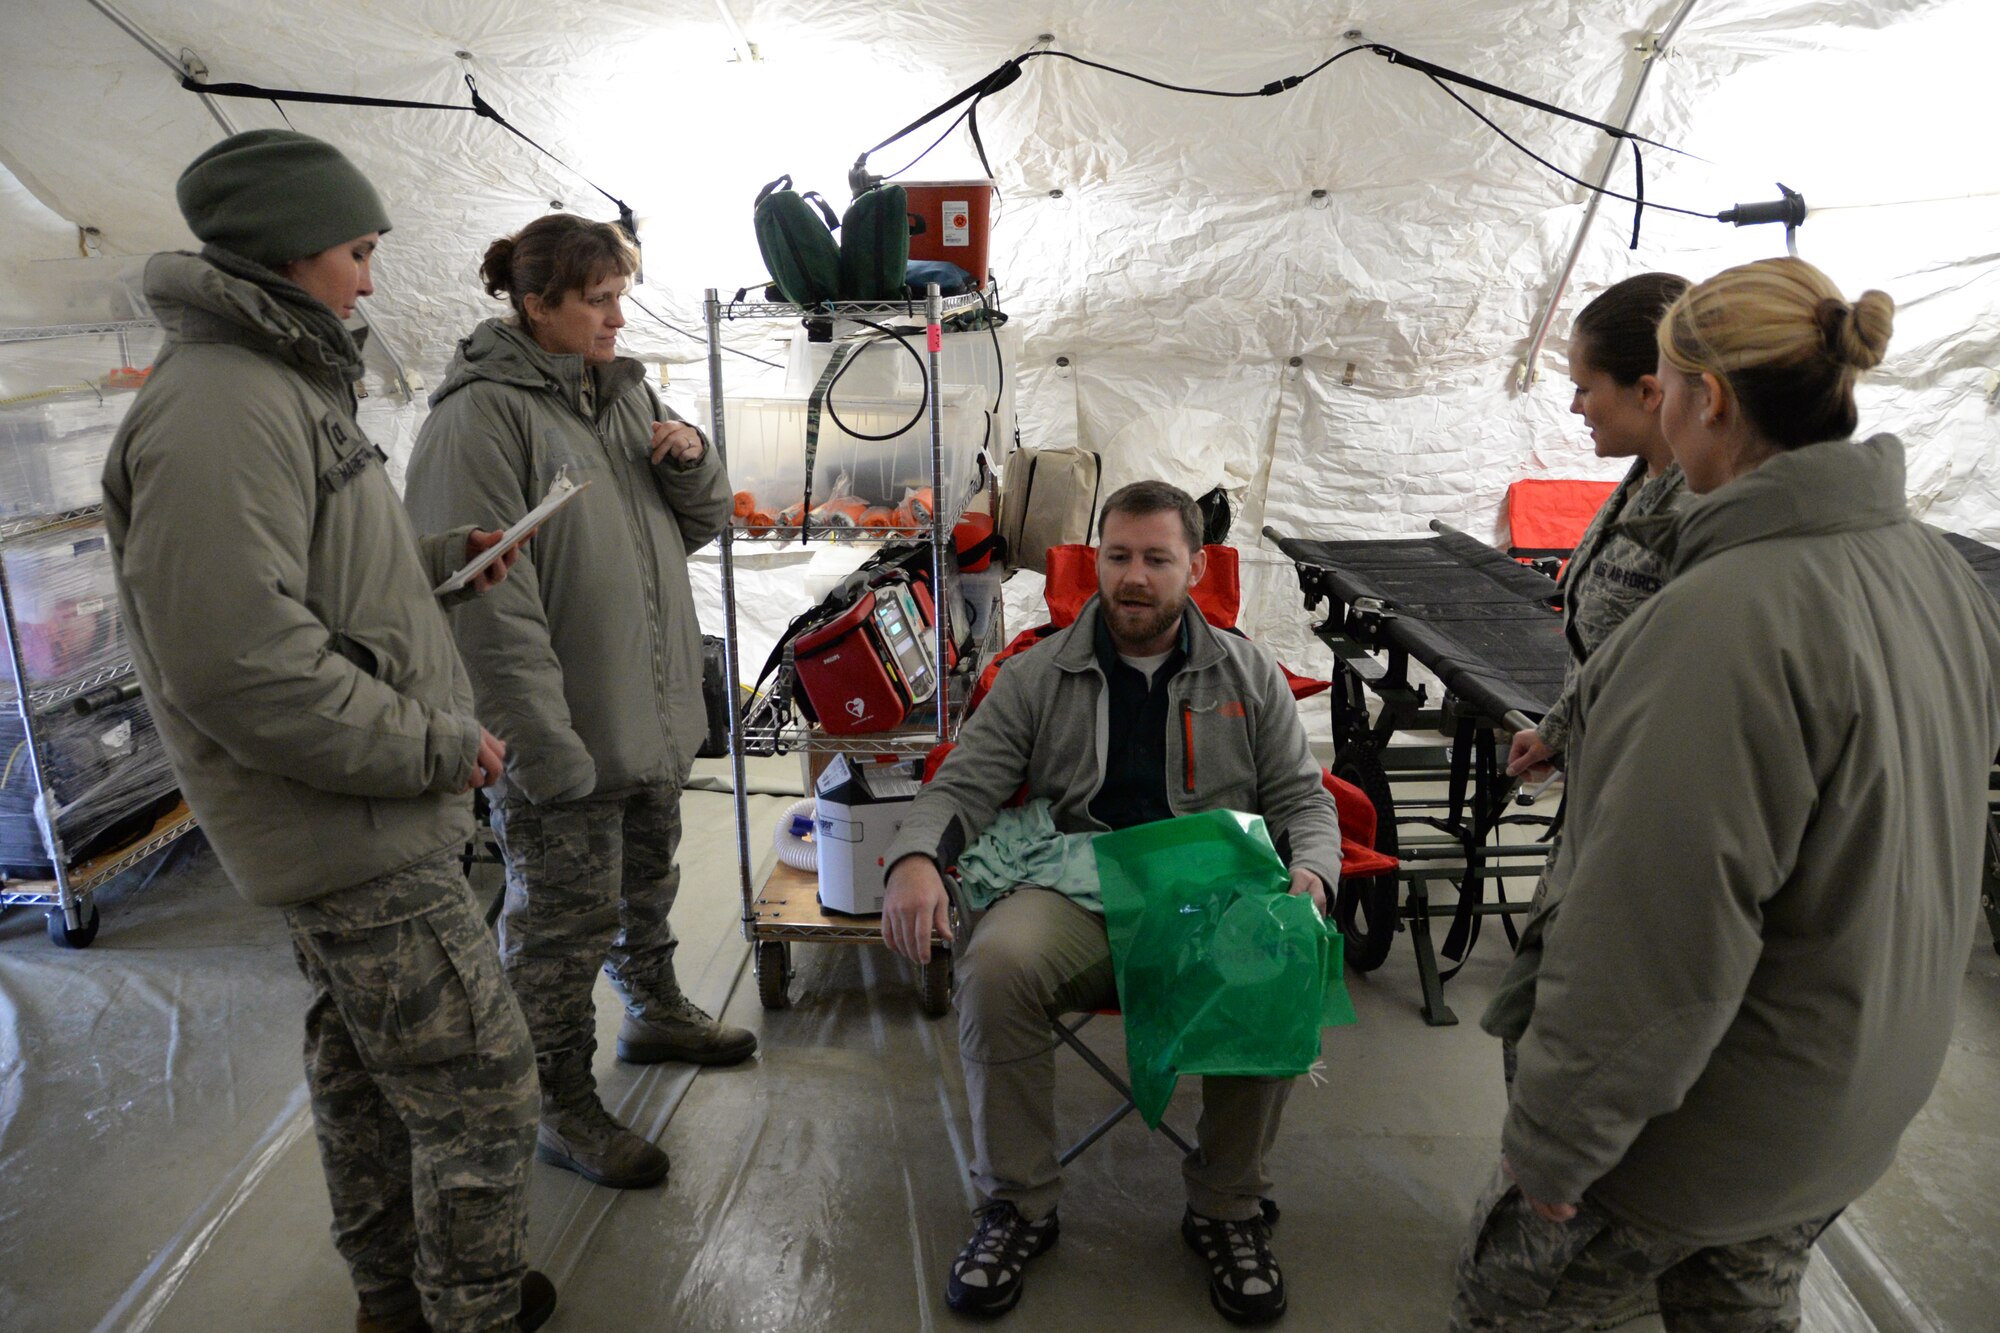 U.S. Air Force Airmen with the Indiana Air National Guard assigned to the 19th CBRNE Enhanced Response Force Package, 181st Intelligence Wing, treat a victim of a simulated chemical explosion outside of the Munson Healthcare Grayling Hospital in Grayling, Mich., April 6, 2016. (U.S. Air National Guard photo by Airman 1st Class Kevin D. Schulze)